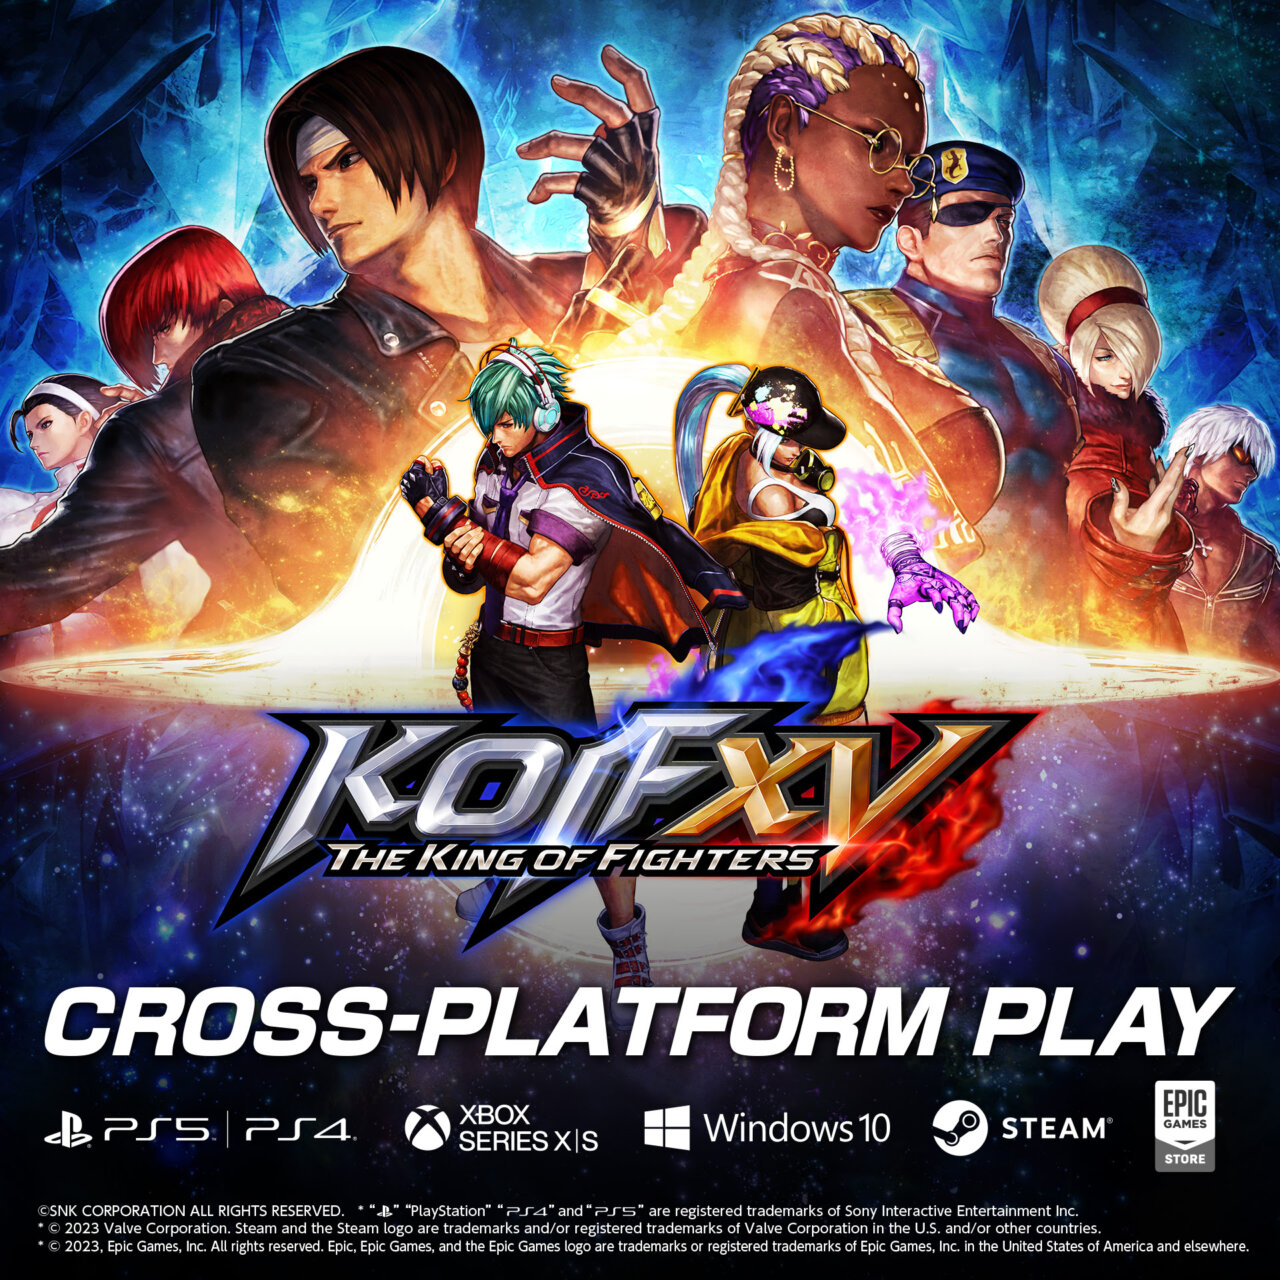 The King of Fighters XV Free DLC Character Goenitz Gets Release